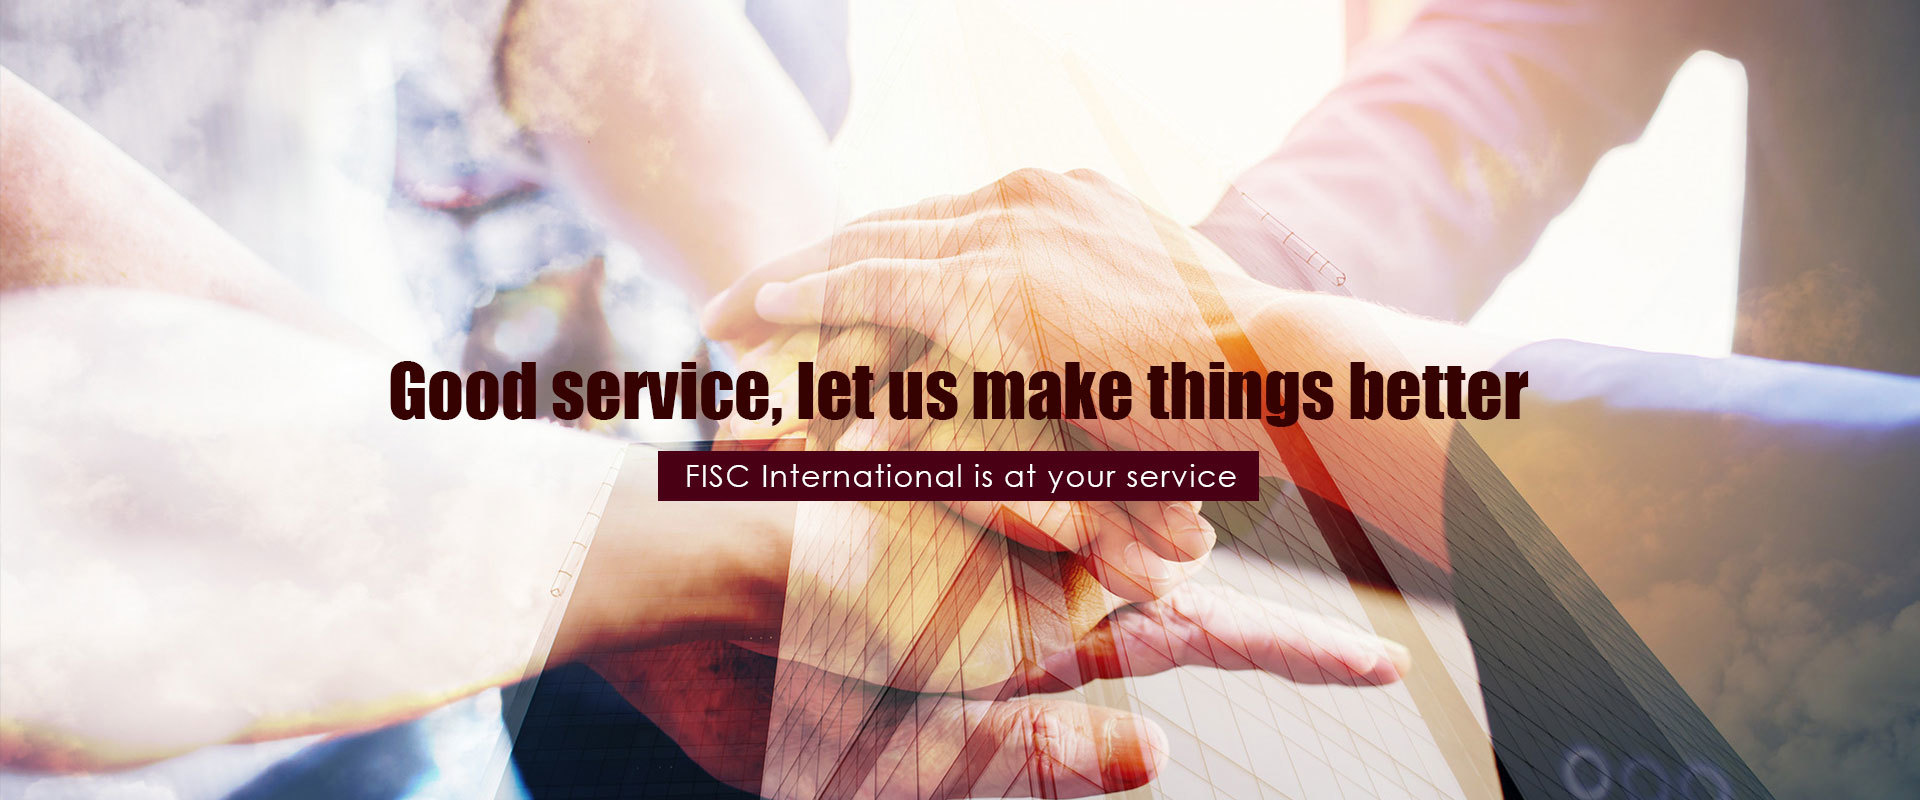 FISC International is at your service